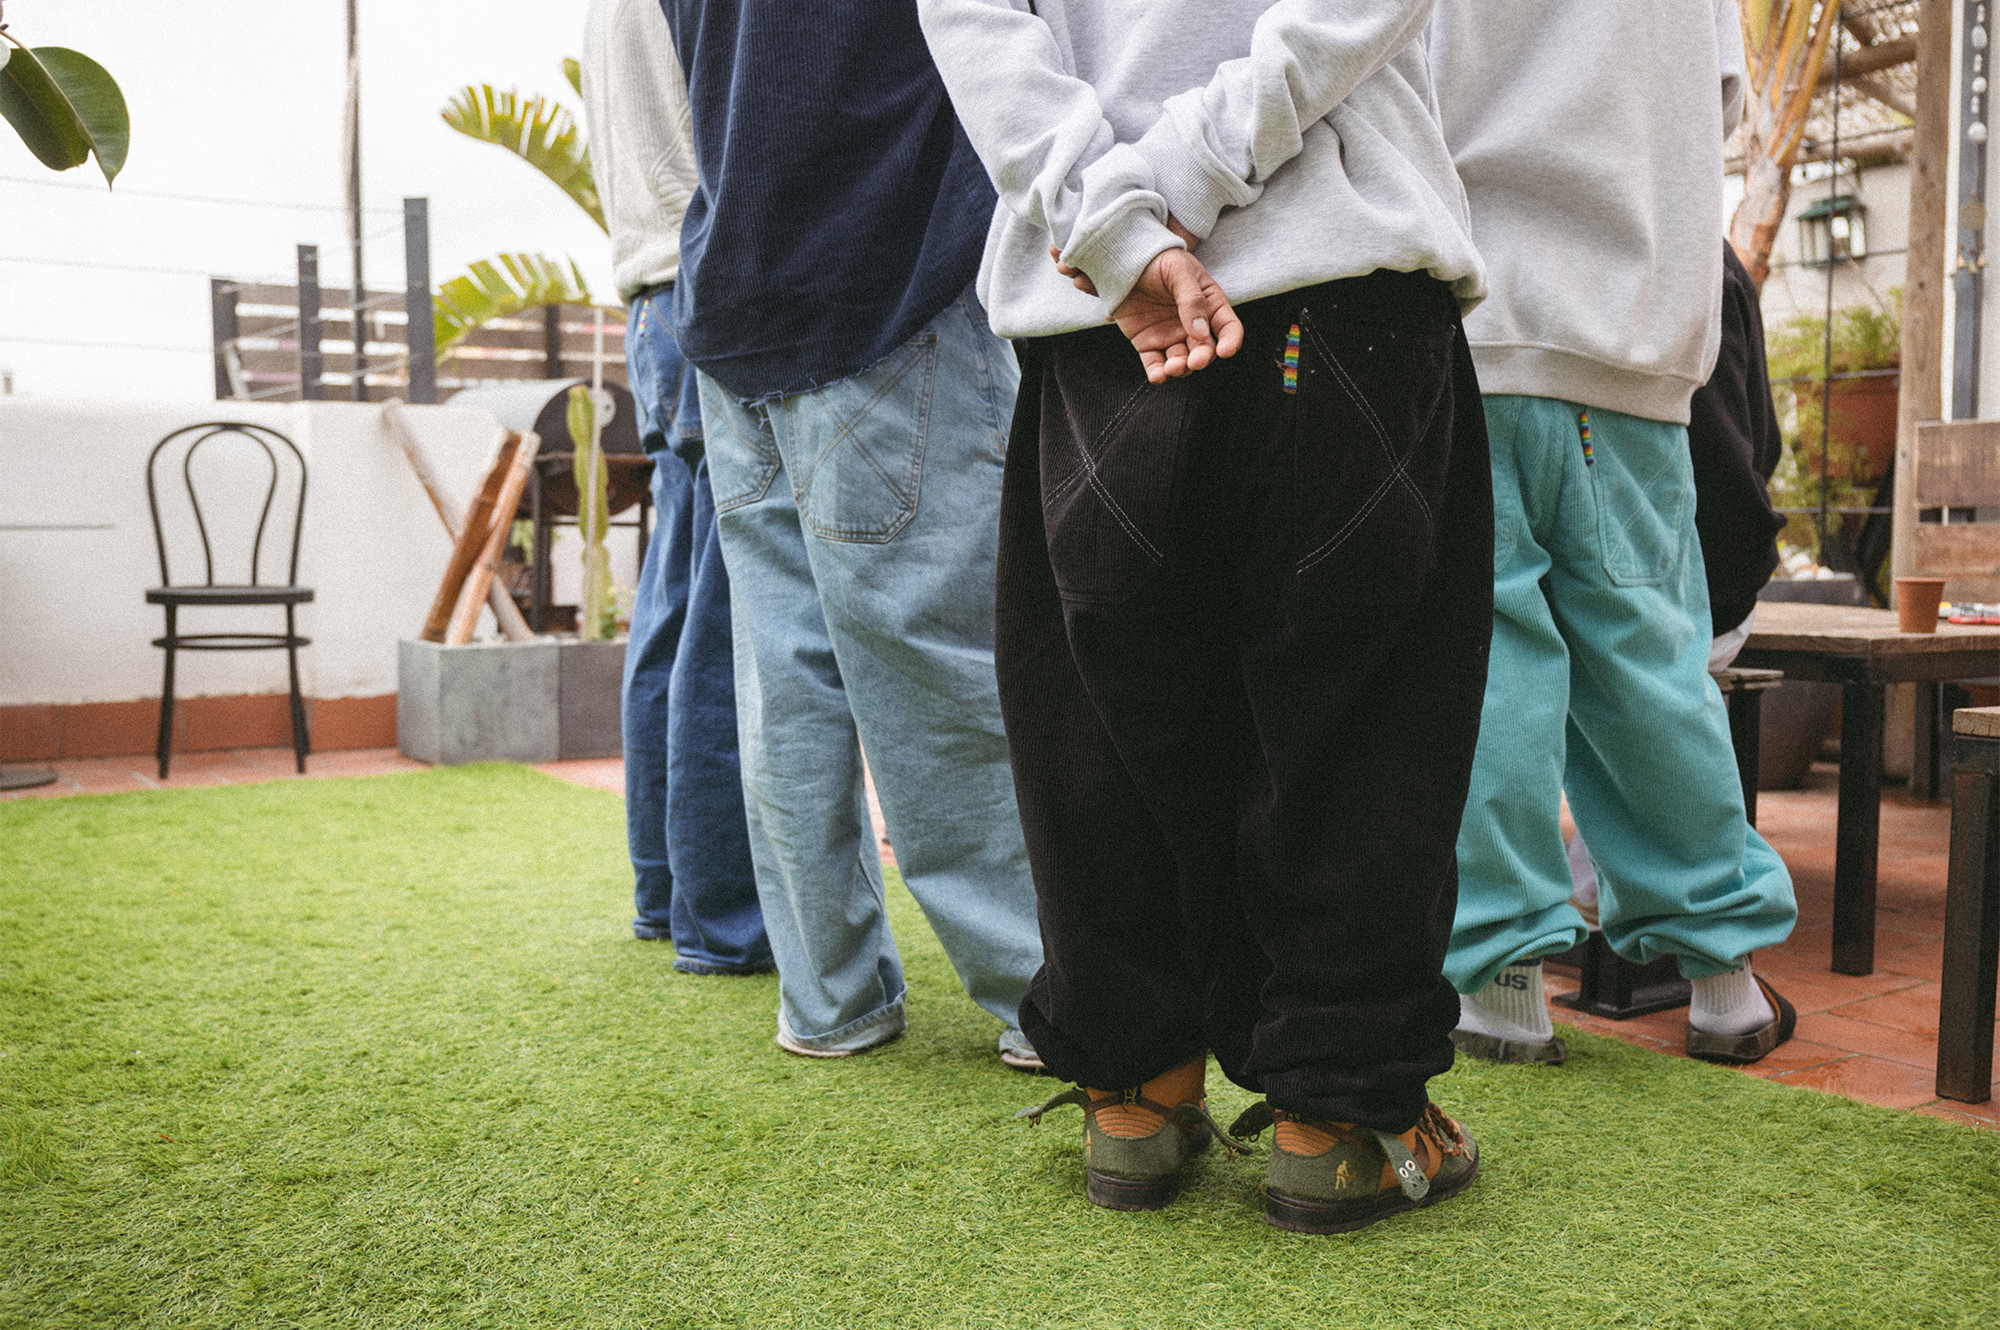 Big, Baggy Pants Were the Biggest Fashion Trend of 2022